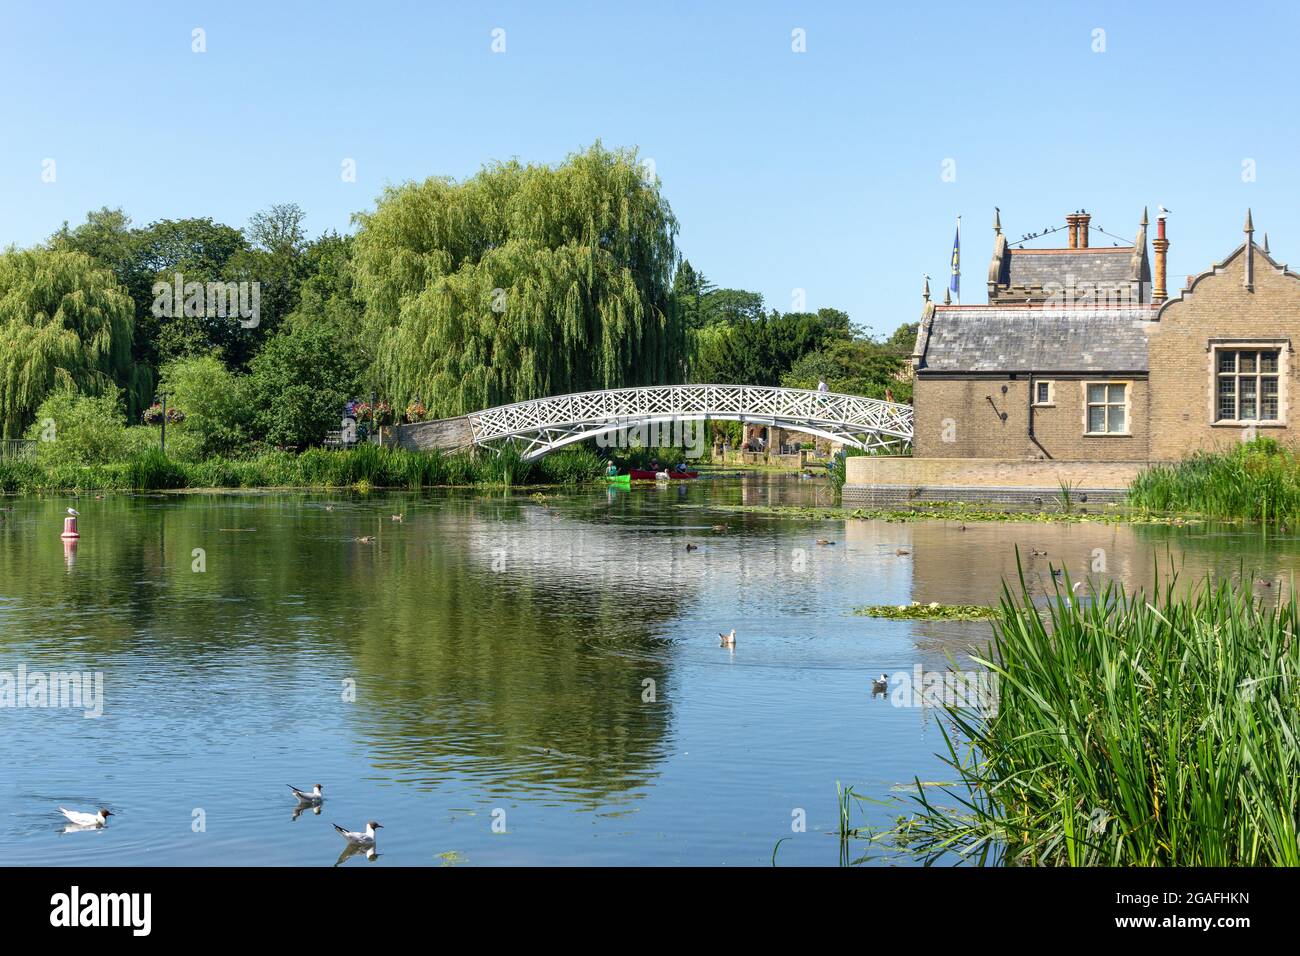 Chinese Bridge over River Great Ouse, The Causeway, Godmanchester, Cambridgeshire, England, United Kingdom Stock Photo